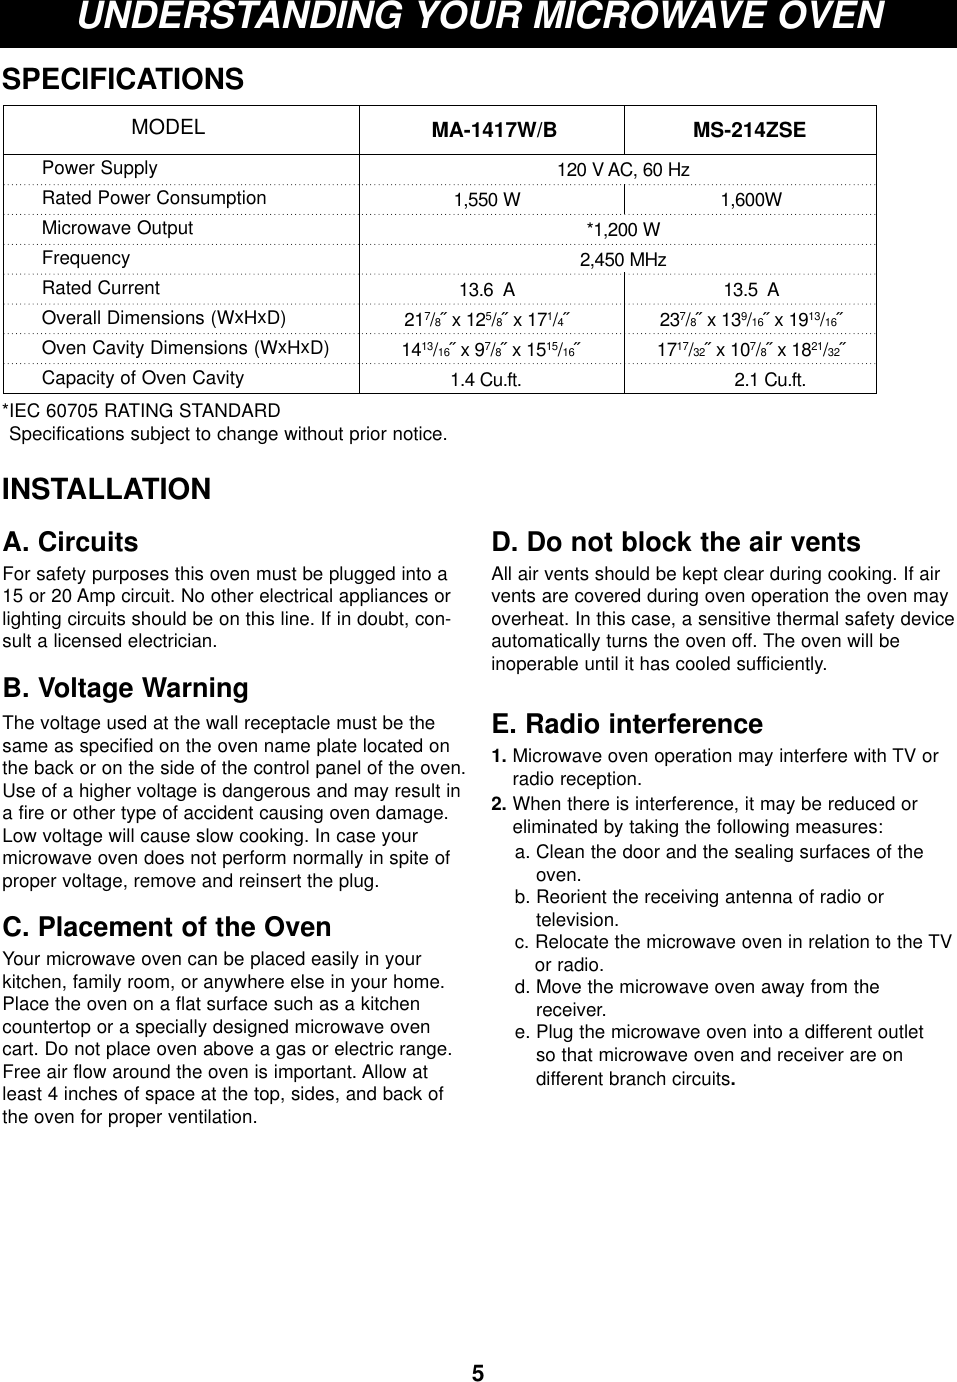 5UNDERSTANDING YOUR MICROWAVE OVENSPECIFICATIONS*IEC 60705 RATING STANDARD Specifications subject to change without prior notice.MA-1417W/B MS-214ZSEMODELPower SupplyRated Power ConsumptionMicrowave OutputFrequencyRated CurrentOverall Dimensions (WxHxD)Oven Cavity Dimensions (WxHxD)Capacity of Oven Cavity120 V AC, 60 Hz1,550 W 1,600W*1,200 W2,450 MHz13.6  A 13.5  A217/8˝ x 125/8˝ x 171/4˝237/8˝ x 139/16˝ x 1913/16˝1413/16˝ x 97/8˝ x 1515/16˝1717/32˝ x 107/8˝ x 1821/32˝1.4 Cu.ft. 2.1 Cu.ft.INSTALLATIONA. CircuitsFor safety purposes this oven must be plugged into a15 or 20 Amp circuit. No other electrical appliances orlighting circuits should be on this line. If in doubt, con-sult a licensed electrician.B. Voltage Warning The voltage used at the wall receptacle must be thesame as specified on the oven name plate located onthe back or on the side of the control panel of the oven.Use of a higher voltage is dangerous and may result ina fire or other type of accident causing oven damage.Low voltage will cause slow cooking. In case yourmicrowave oven does not perform normally in spite ofproper voltage, remove and reinsert the plug.C. Placement of the OvenYour microwave oven can be placed easily in yourkitchen, family room, or anywhere else in your home.Place the oven on a flat surface such as a kitchencountertop or a specially designed microwave ovencart. Do not place oven above a gas or electric range.Free air flow around the oven is important. Allow atleast 4 inches of space at the top, sides, and back ofthe oven for proper ventilation. D. Do not block the air ventsAll air vents should be kept clear during cooking. If airvents are covered during oven operation the oven mayoverheat. In this case, a sensitive thermal safety deviceautomatically turns the oven off. The oven will be inoperable until it has cooled sufficiently.E. Radio interference1. Microwave oven operation may interfere with TV orradio reception.2. When there is interference, it may be reduced oreliminated by taking the following measures:a. Clean the door and the sealing surfaces of theoven.b. Reorient the receiving antenna of radio or television.c. Relocate the microwave oven in relation to the TVor radio.d. Move the microwave oven away from the receiver.e. Plug the microwave oven into a different outlet so that microwave oven and receiver are on different branch circuits.